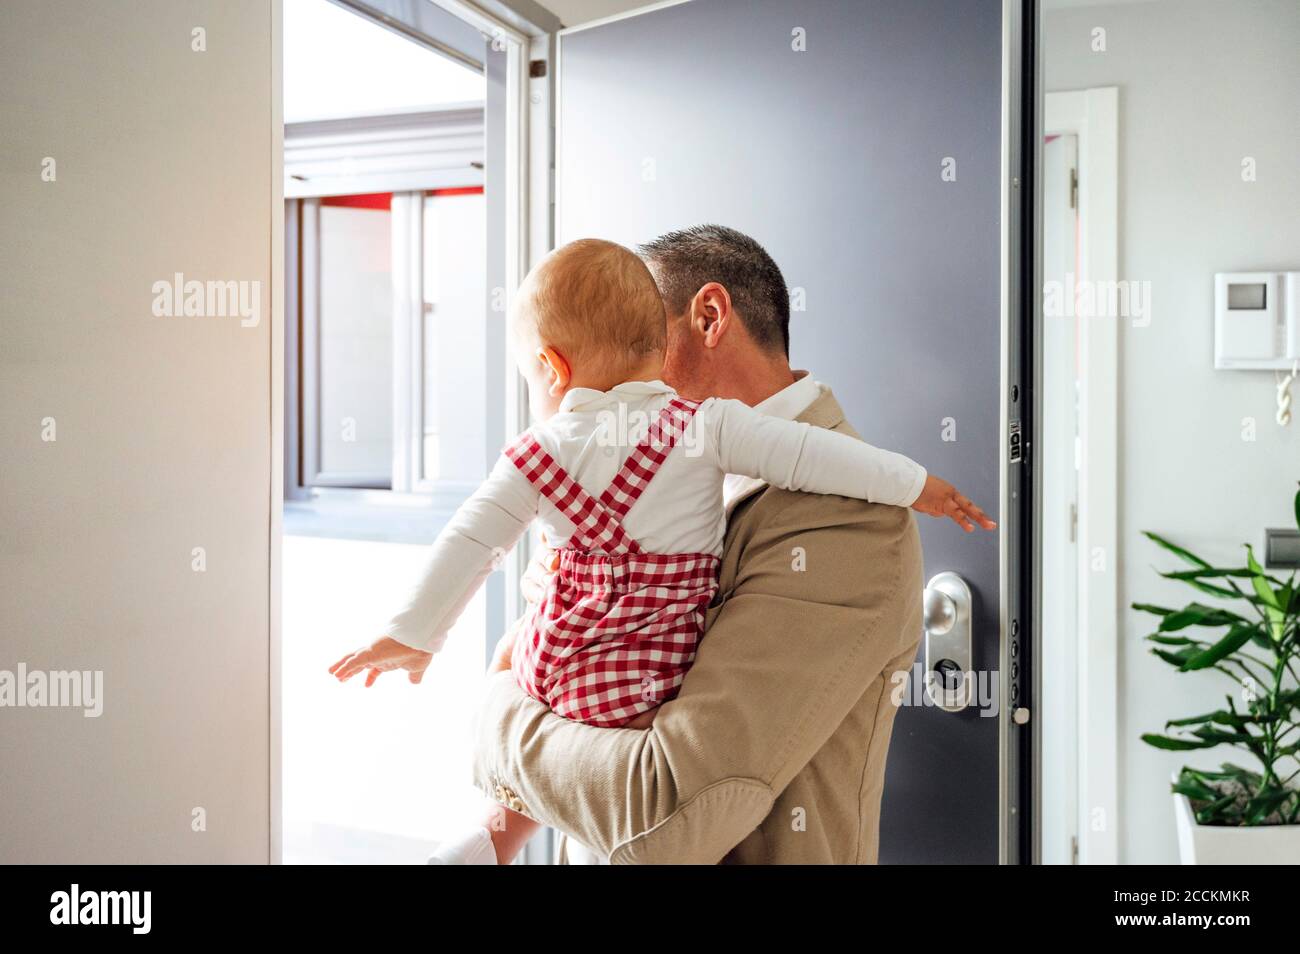 Father holding his baby boy and leaving home Stock Photo